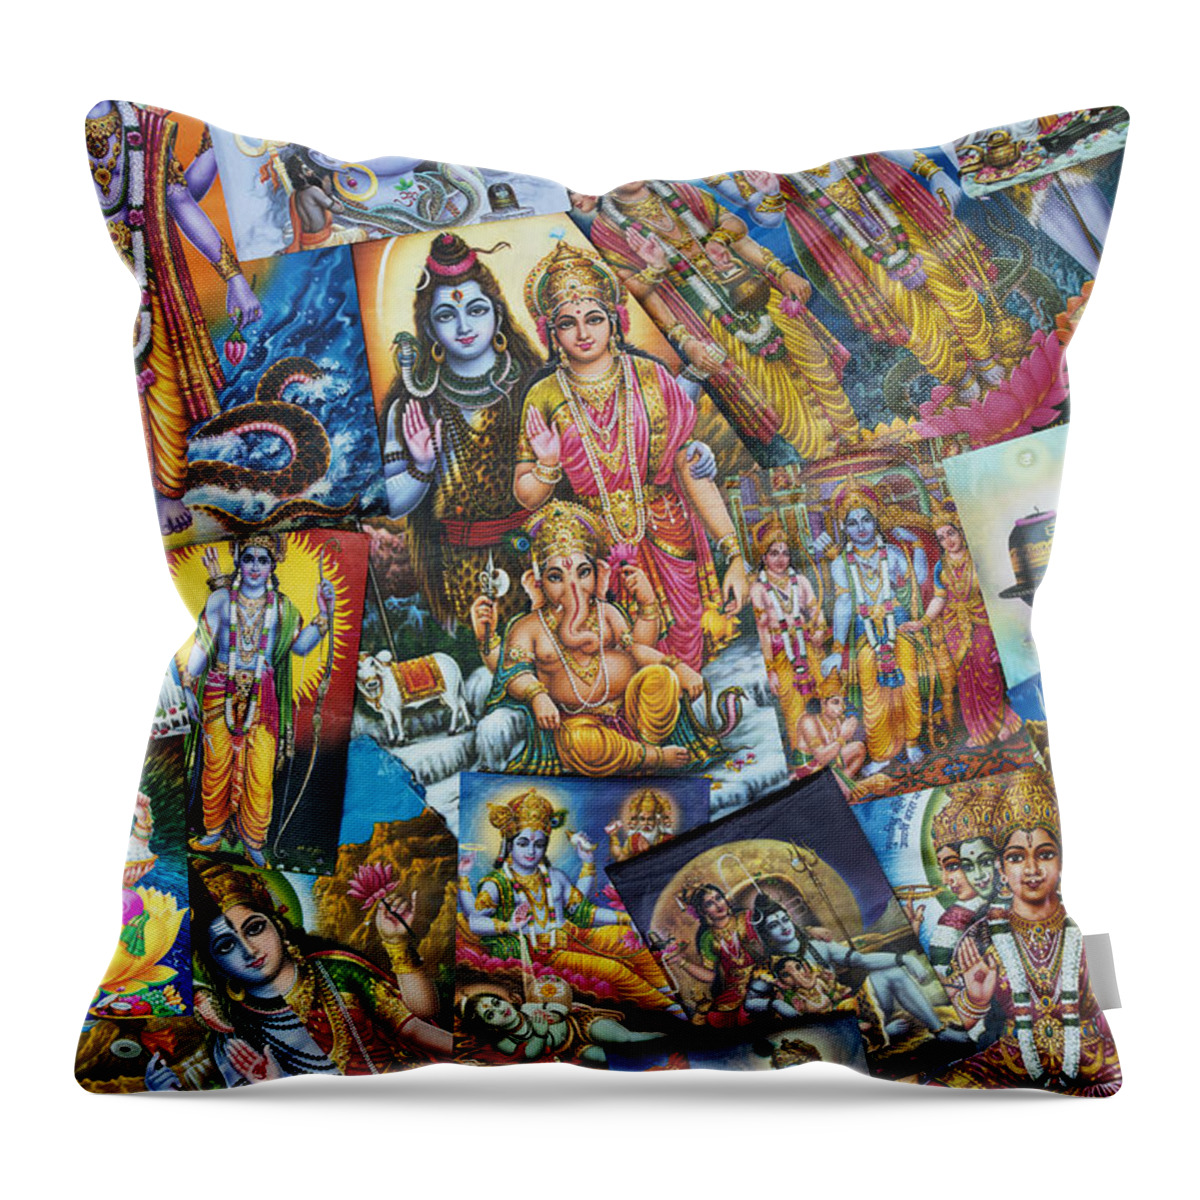 Hindu Poster Throw Pillow featuring the photograph Hindu Deity Posters by Tim Gainey